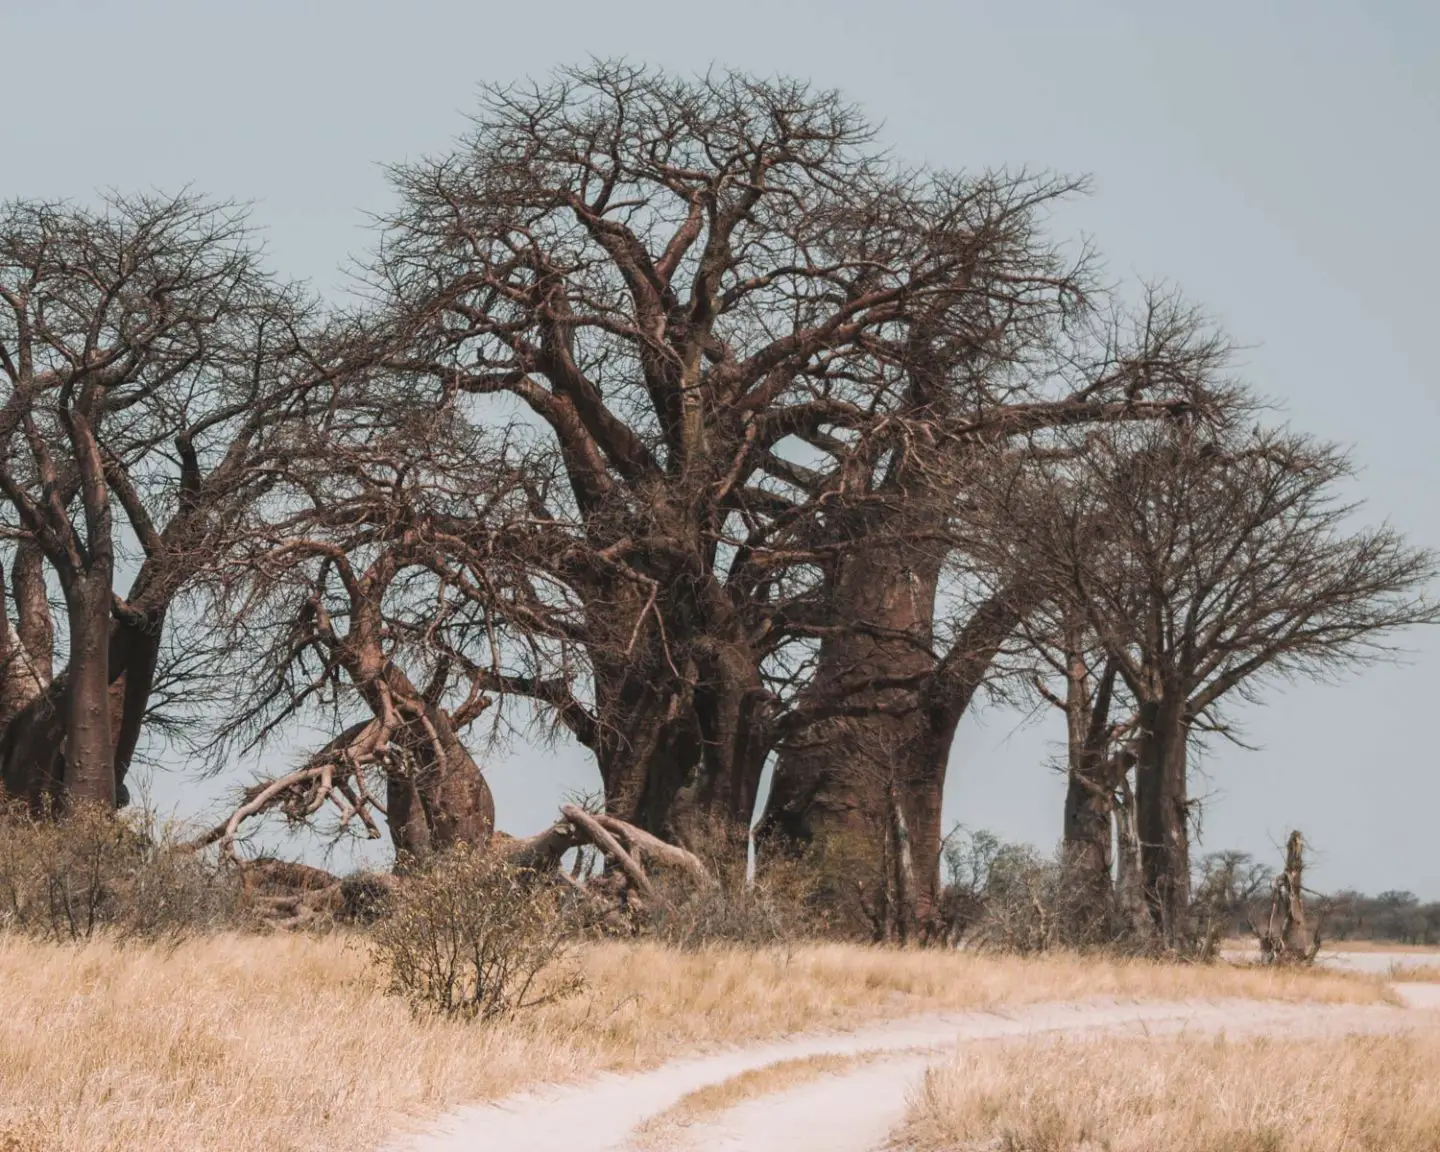 baines baobabs